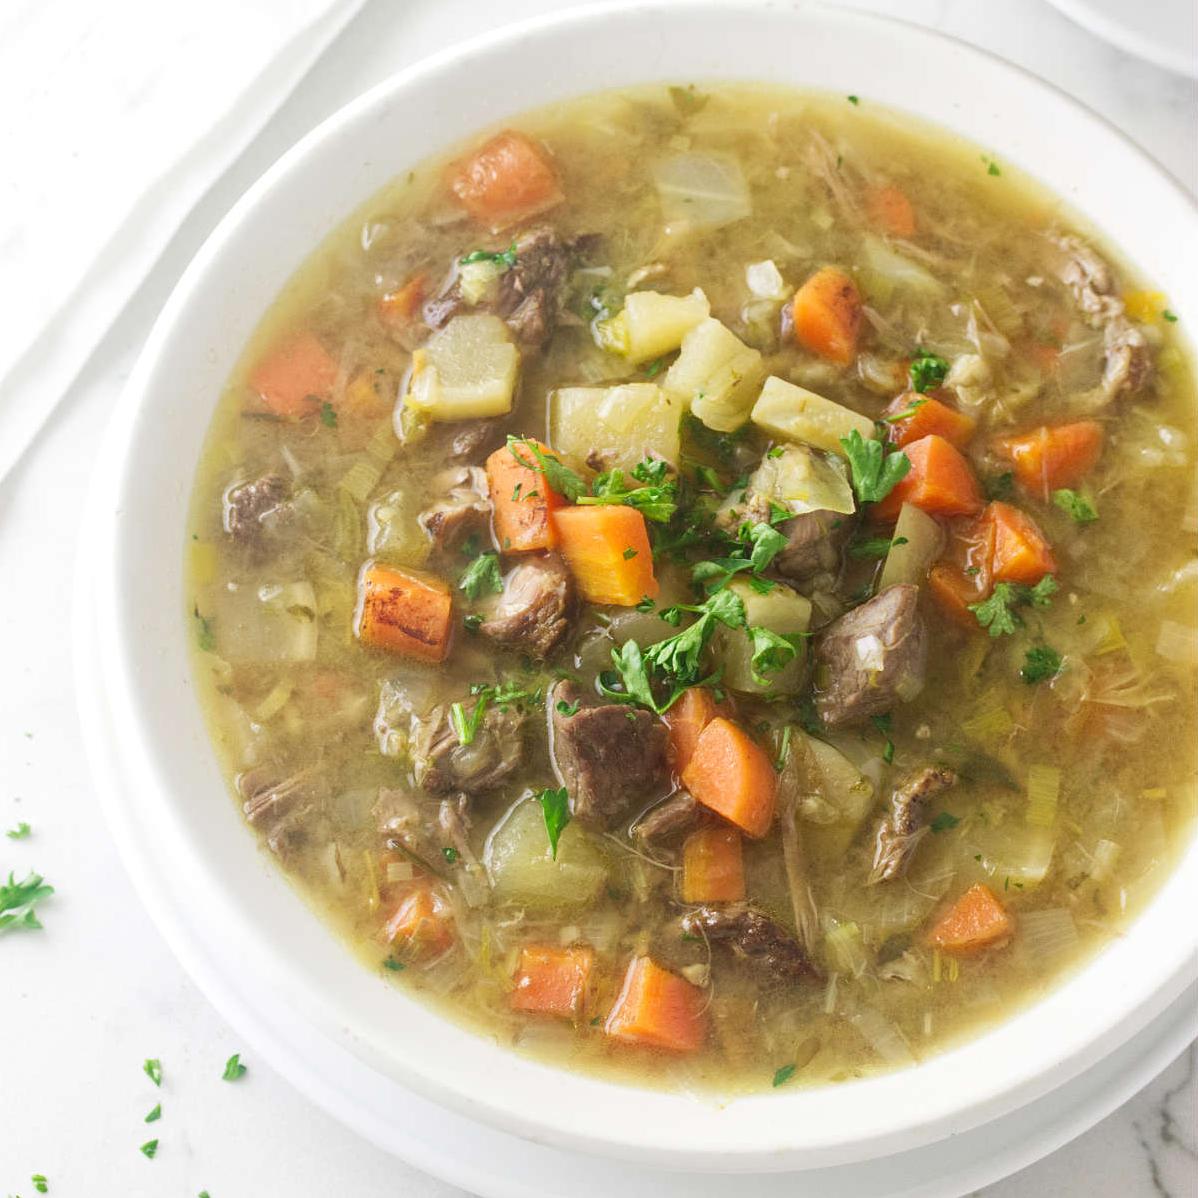  A bowl of comfort on a chilly day: Scotch Broth